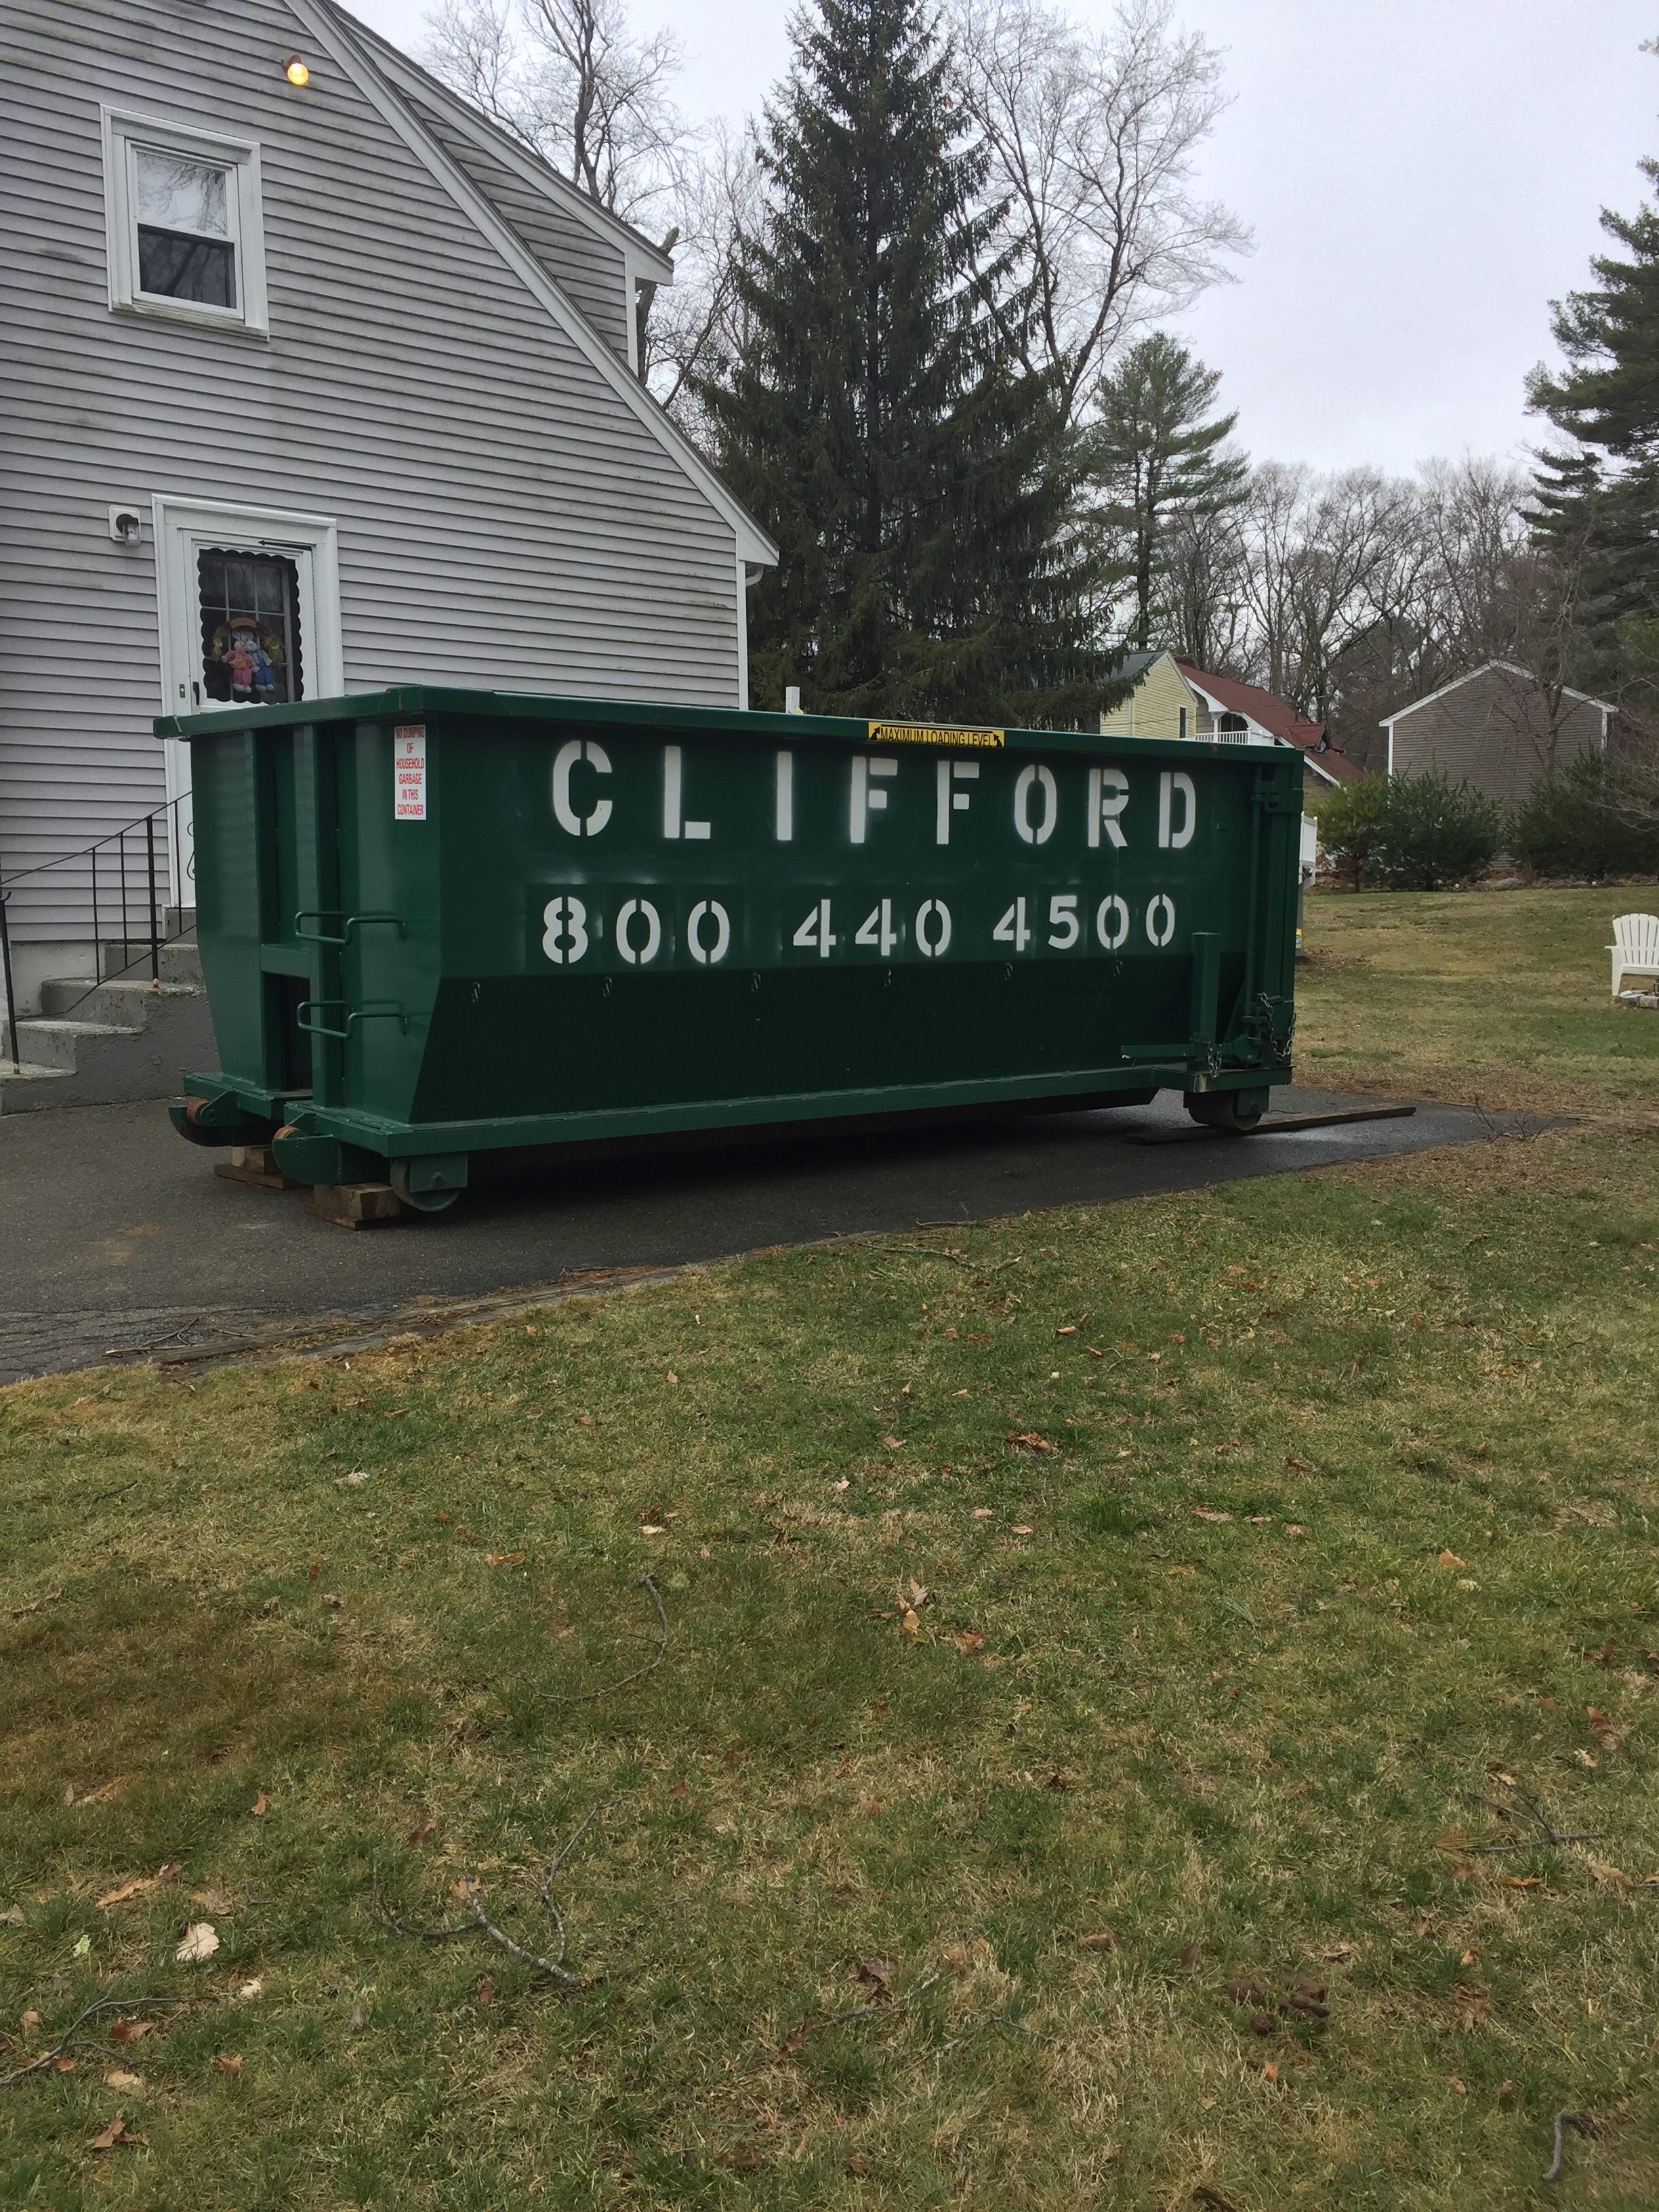 What To Throw In Your Dumpster During A Clean-Out